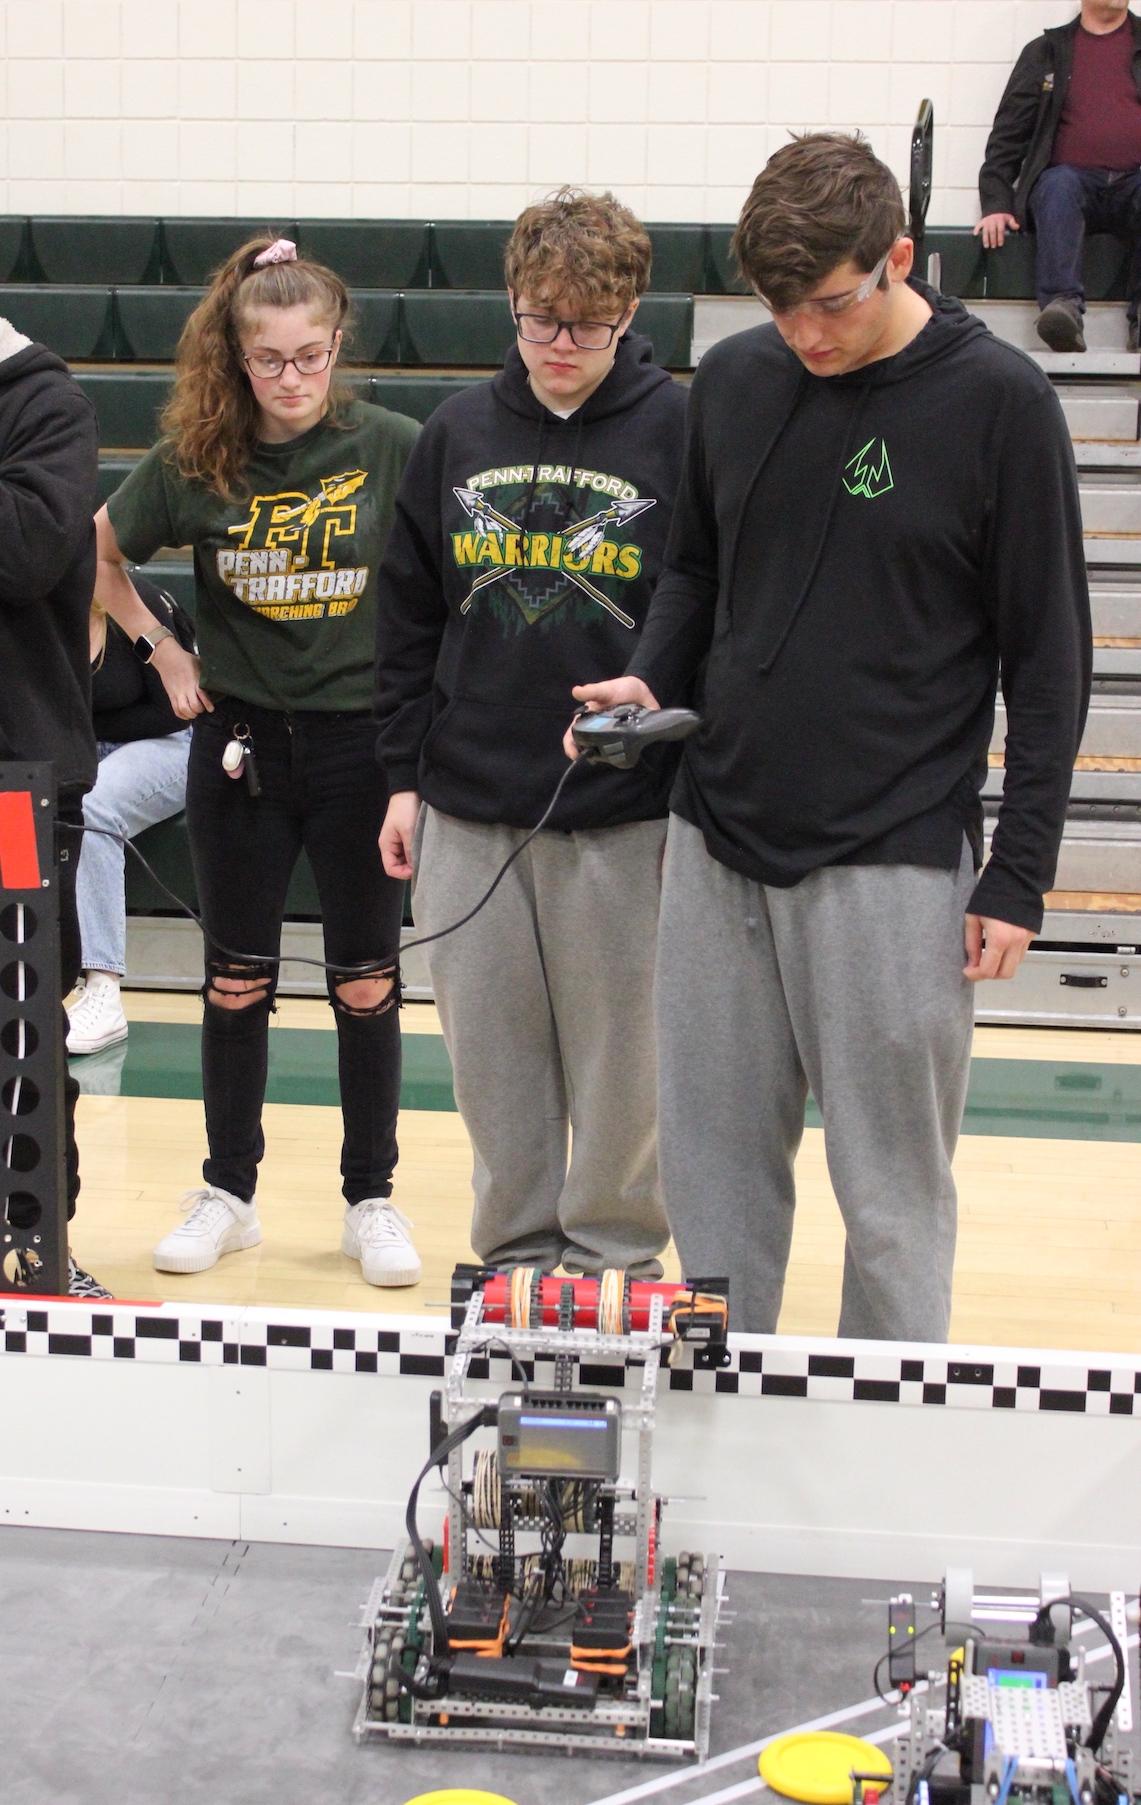 Penn-Trafford team #1462C was a tournament finalist:  (Left to right) Alivia Conrad, Ben Pratkanis, and Vince Patalski (missing from photo: Nicholas Yuhas)